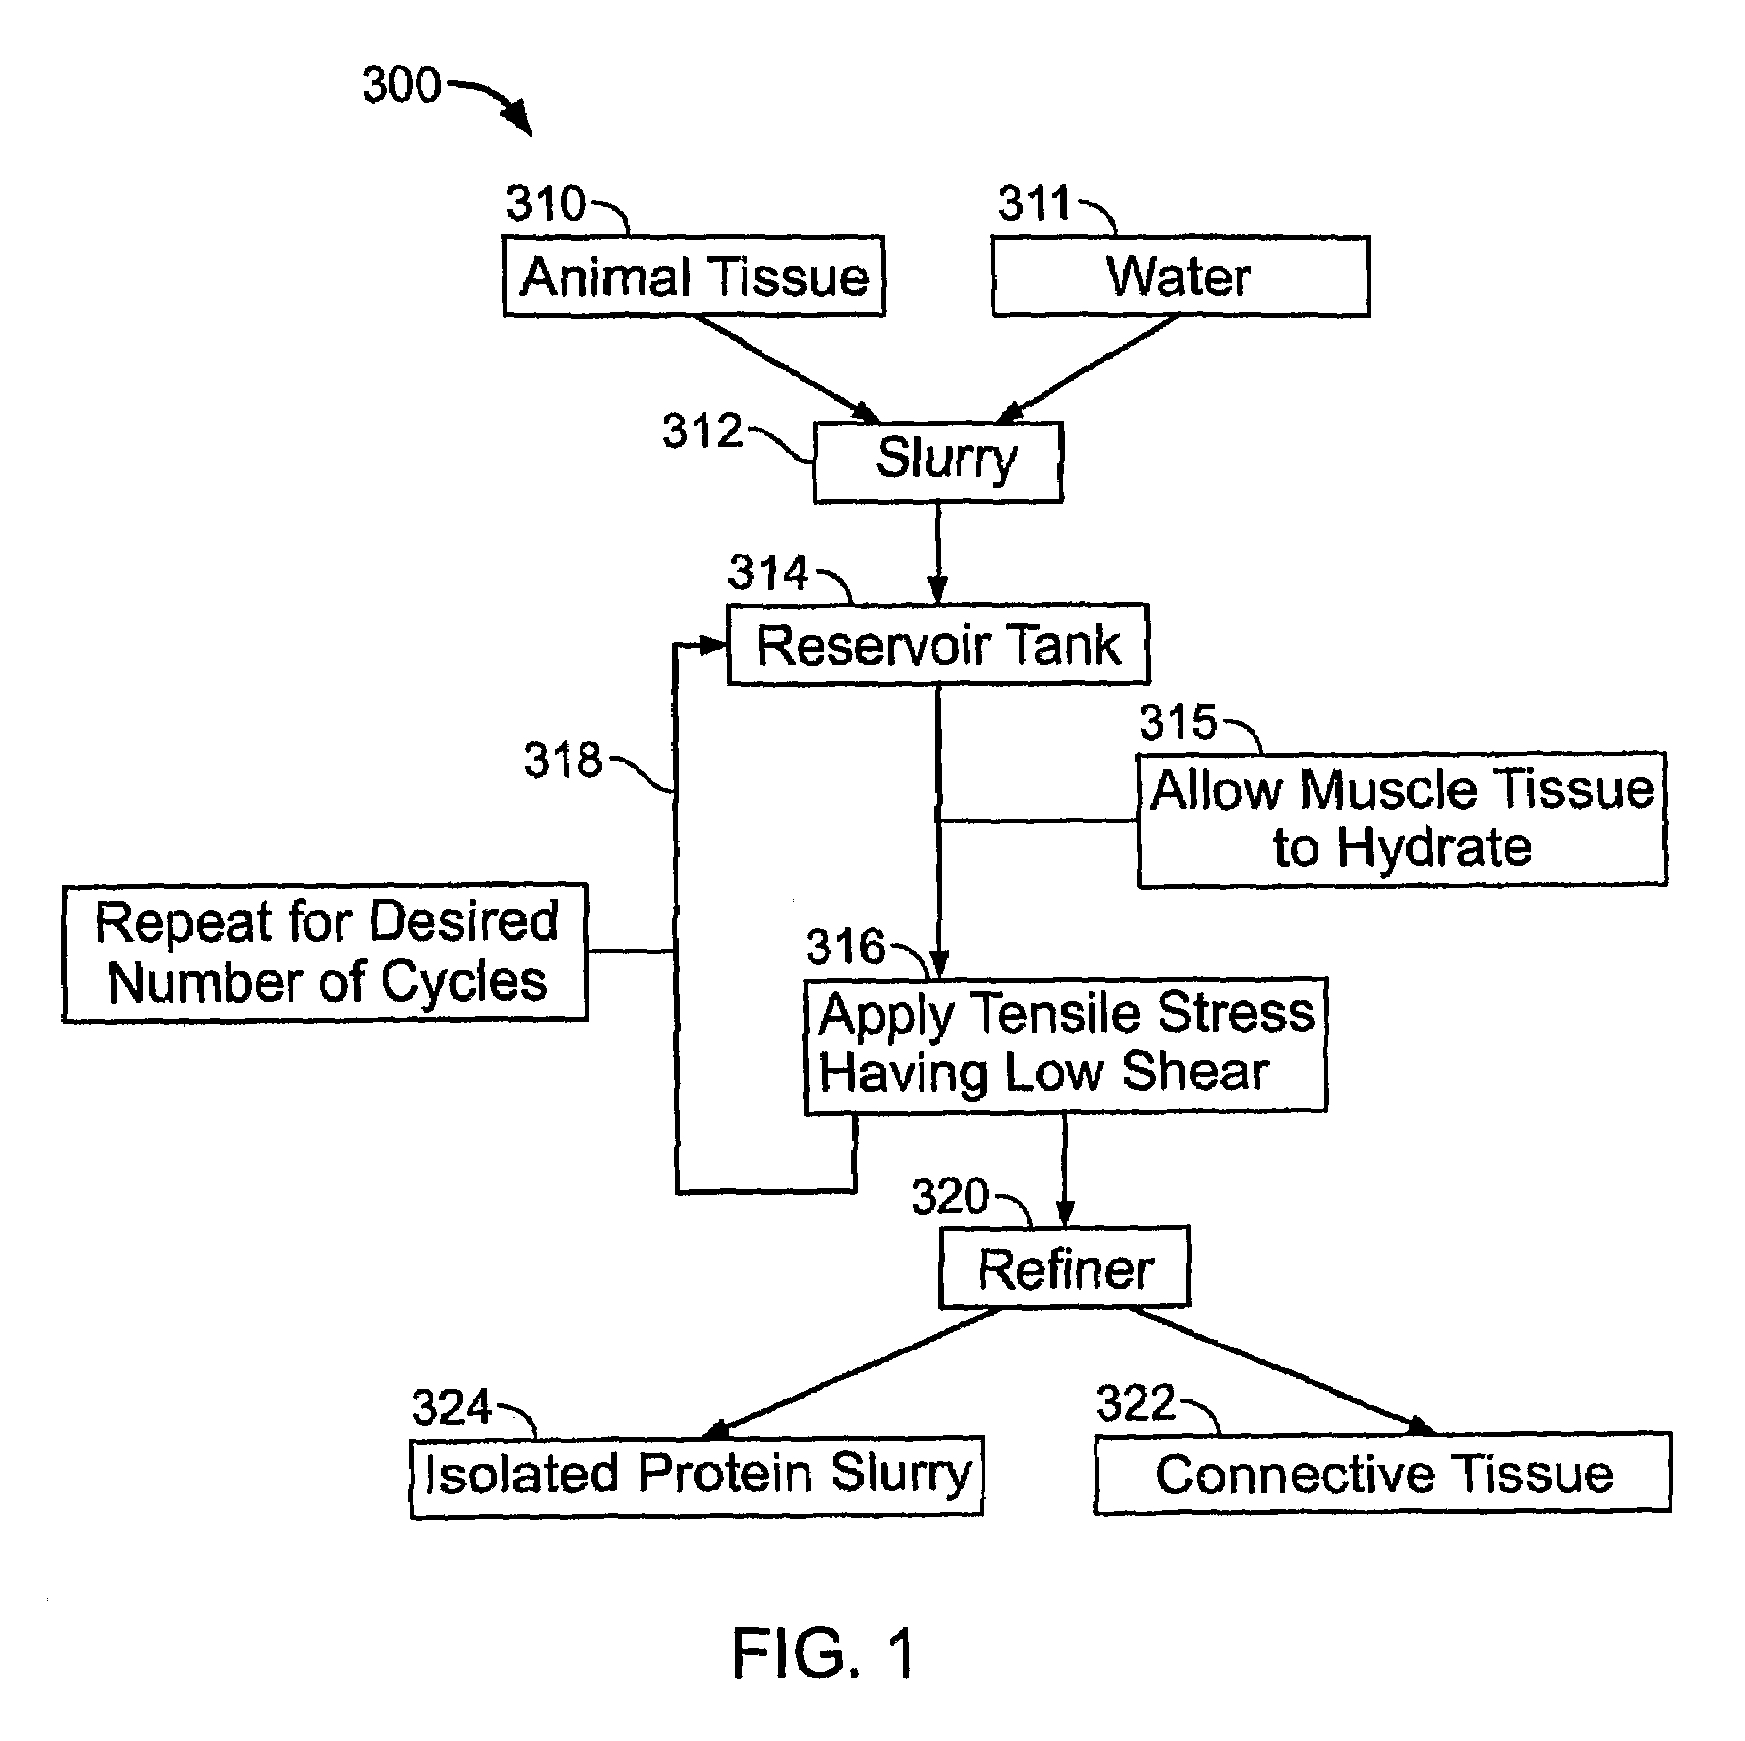 Systems and methods for separating proteins from connective tissue